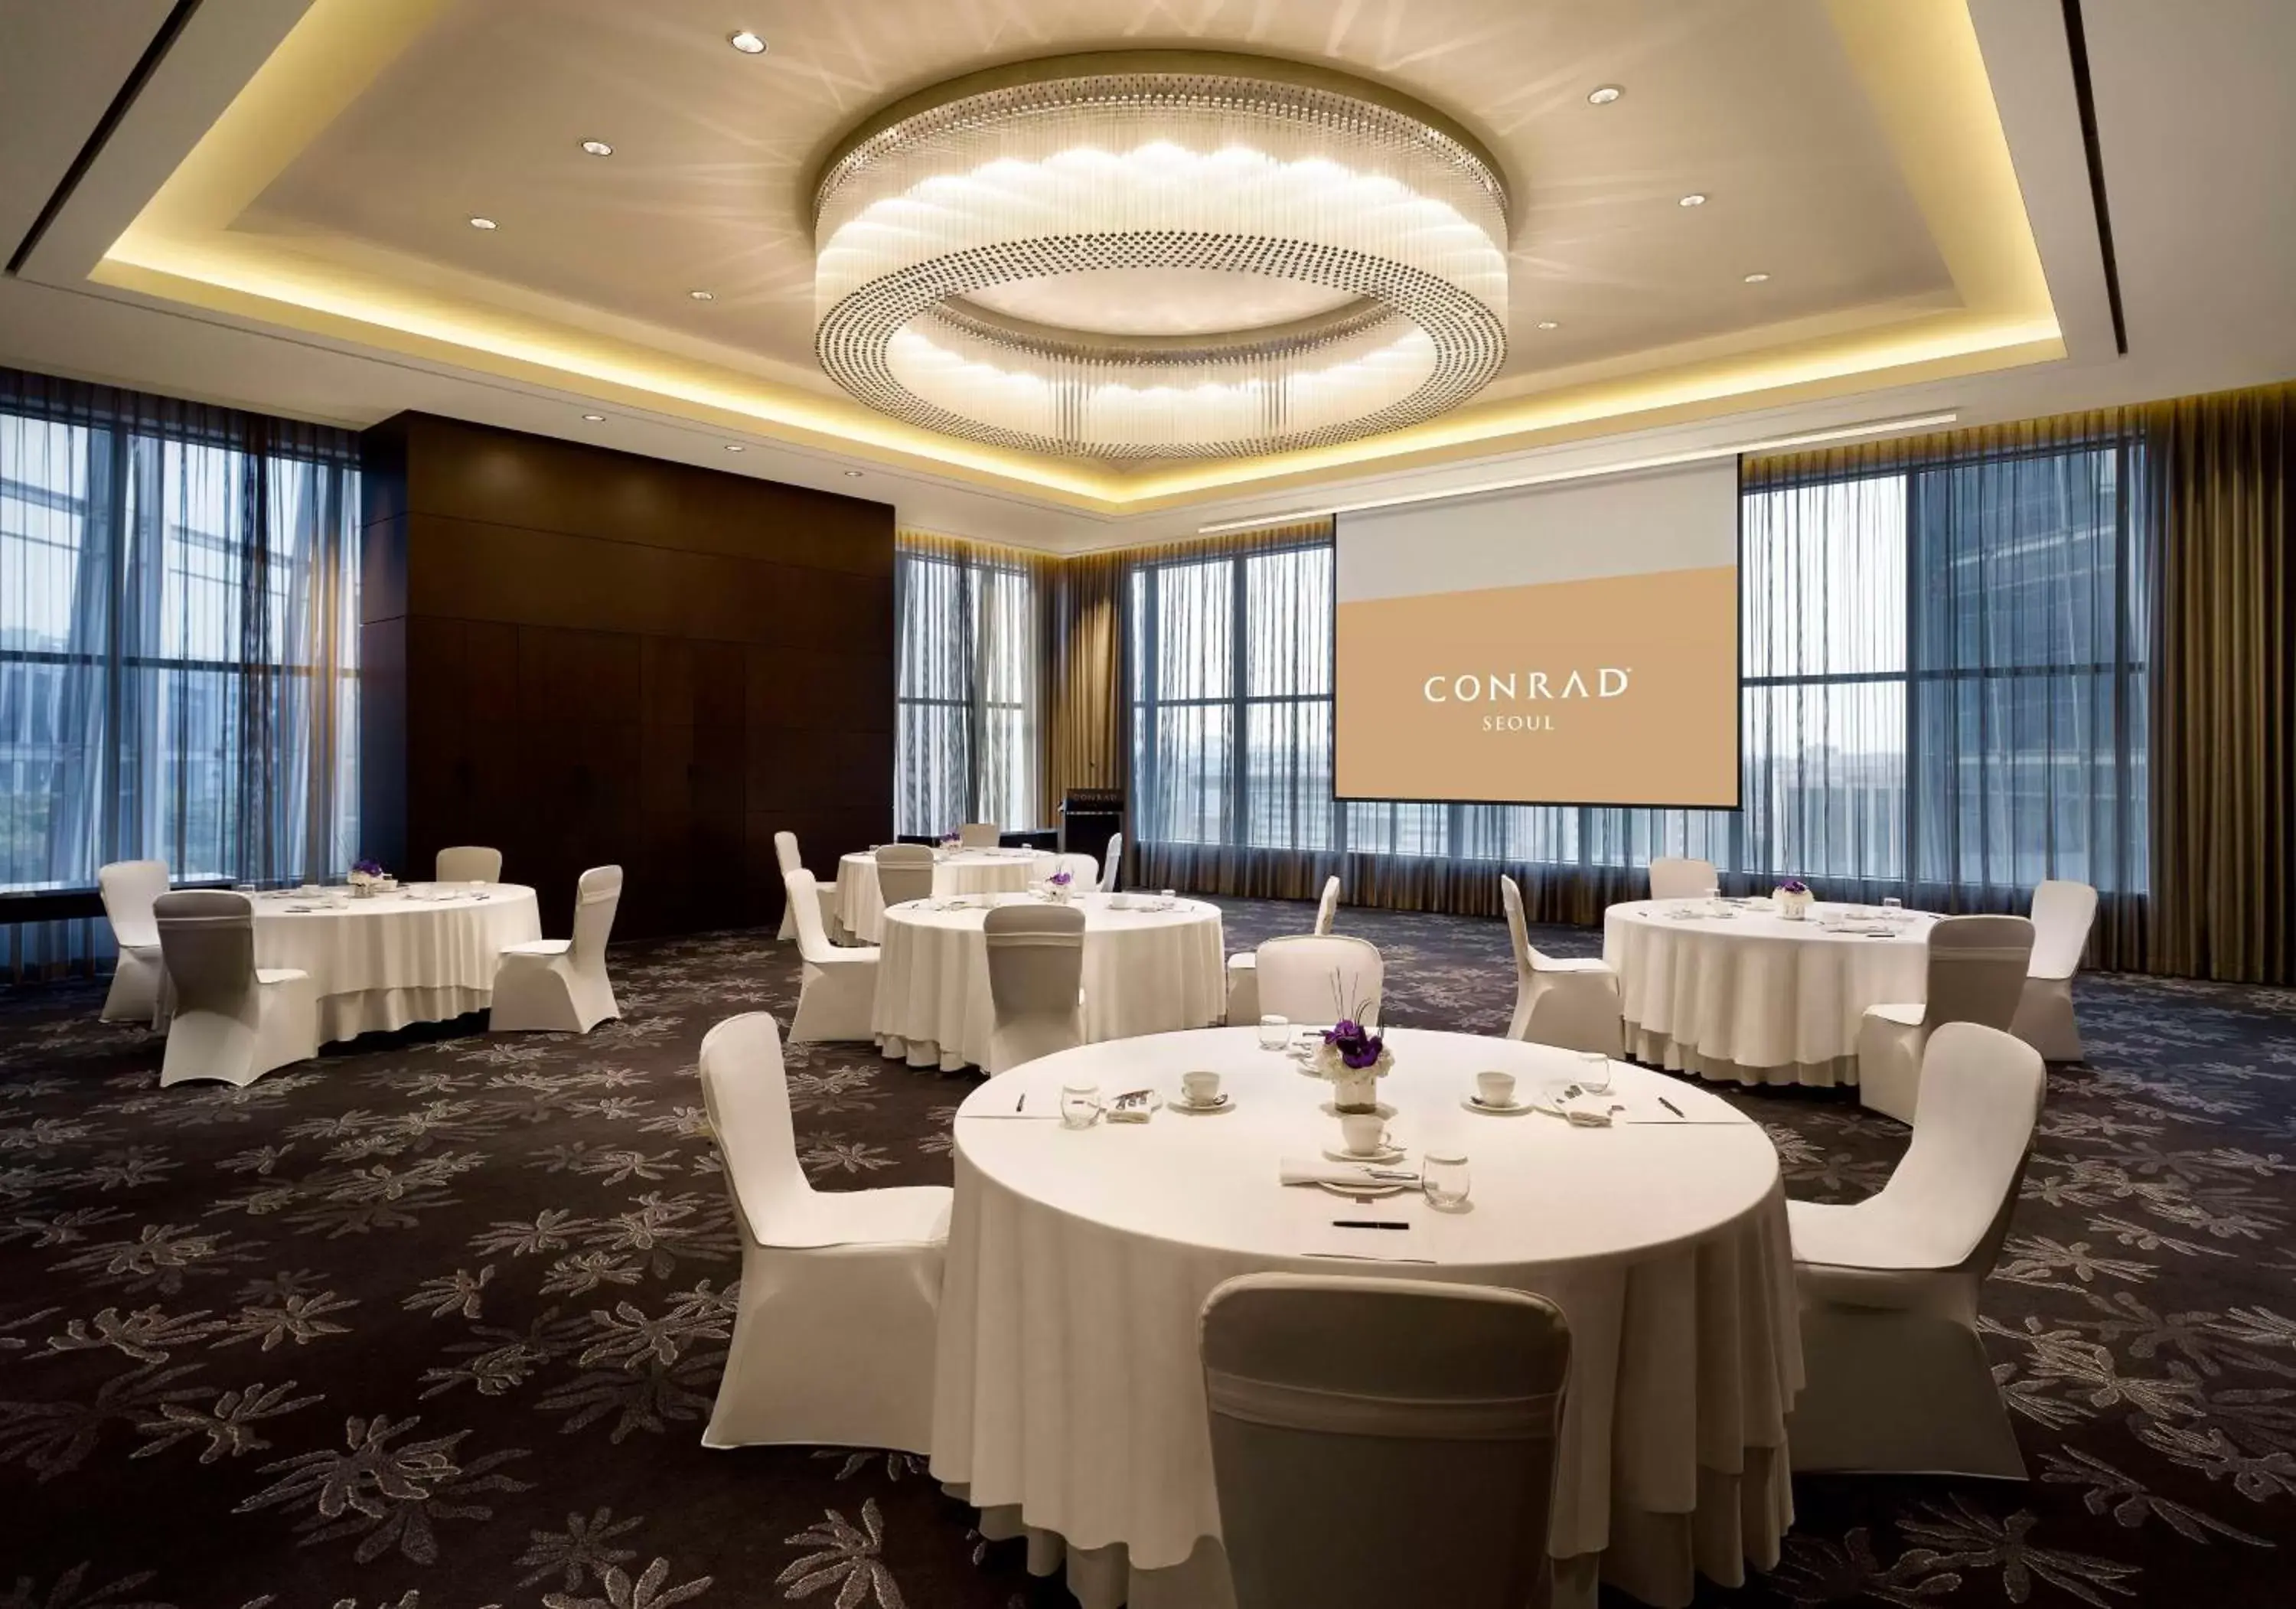 Meeting/conference room, Banquet Facilities in Conrad Seoul